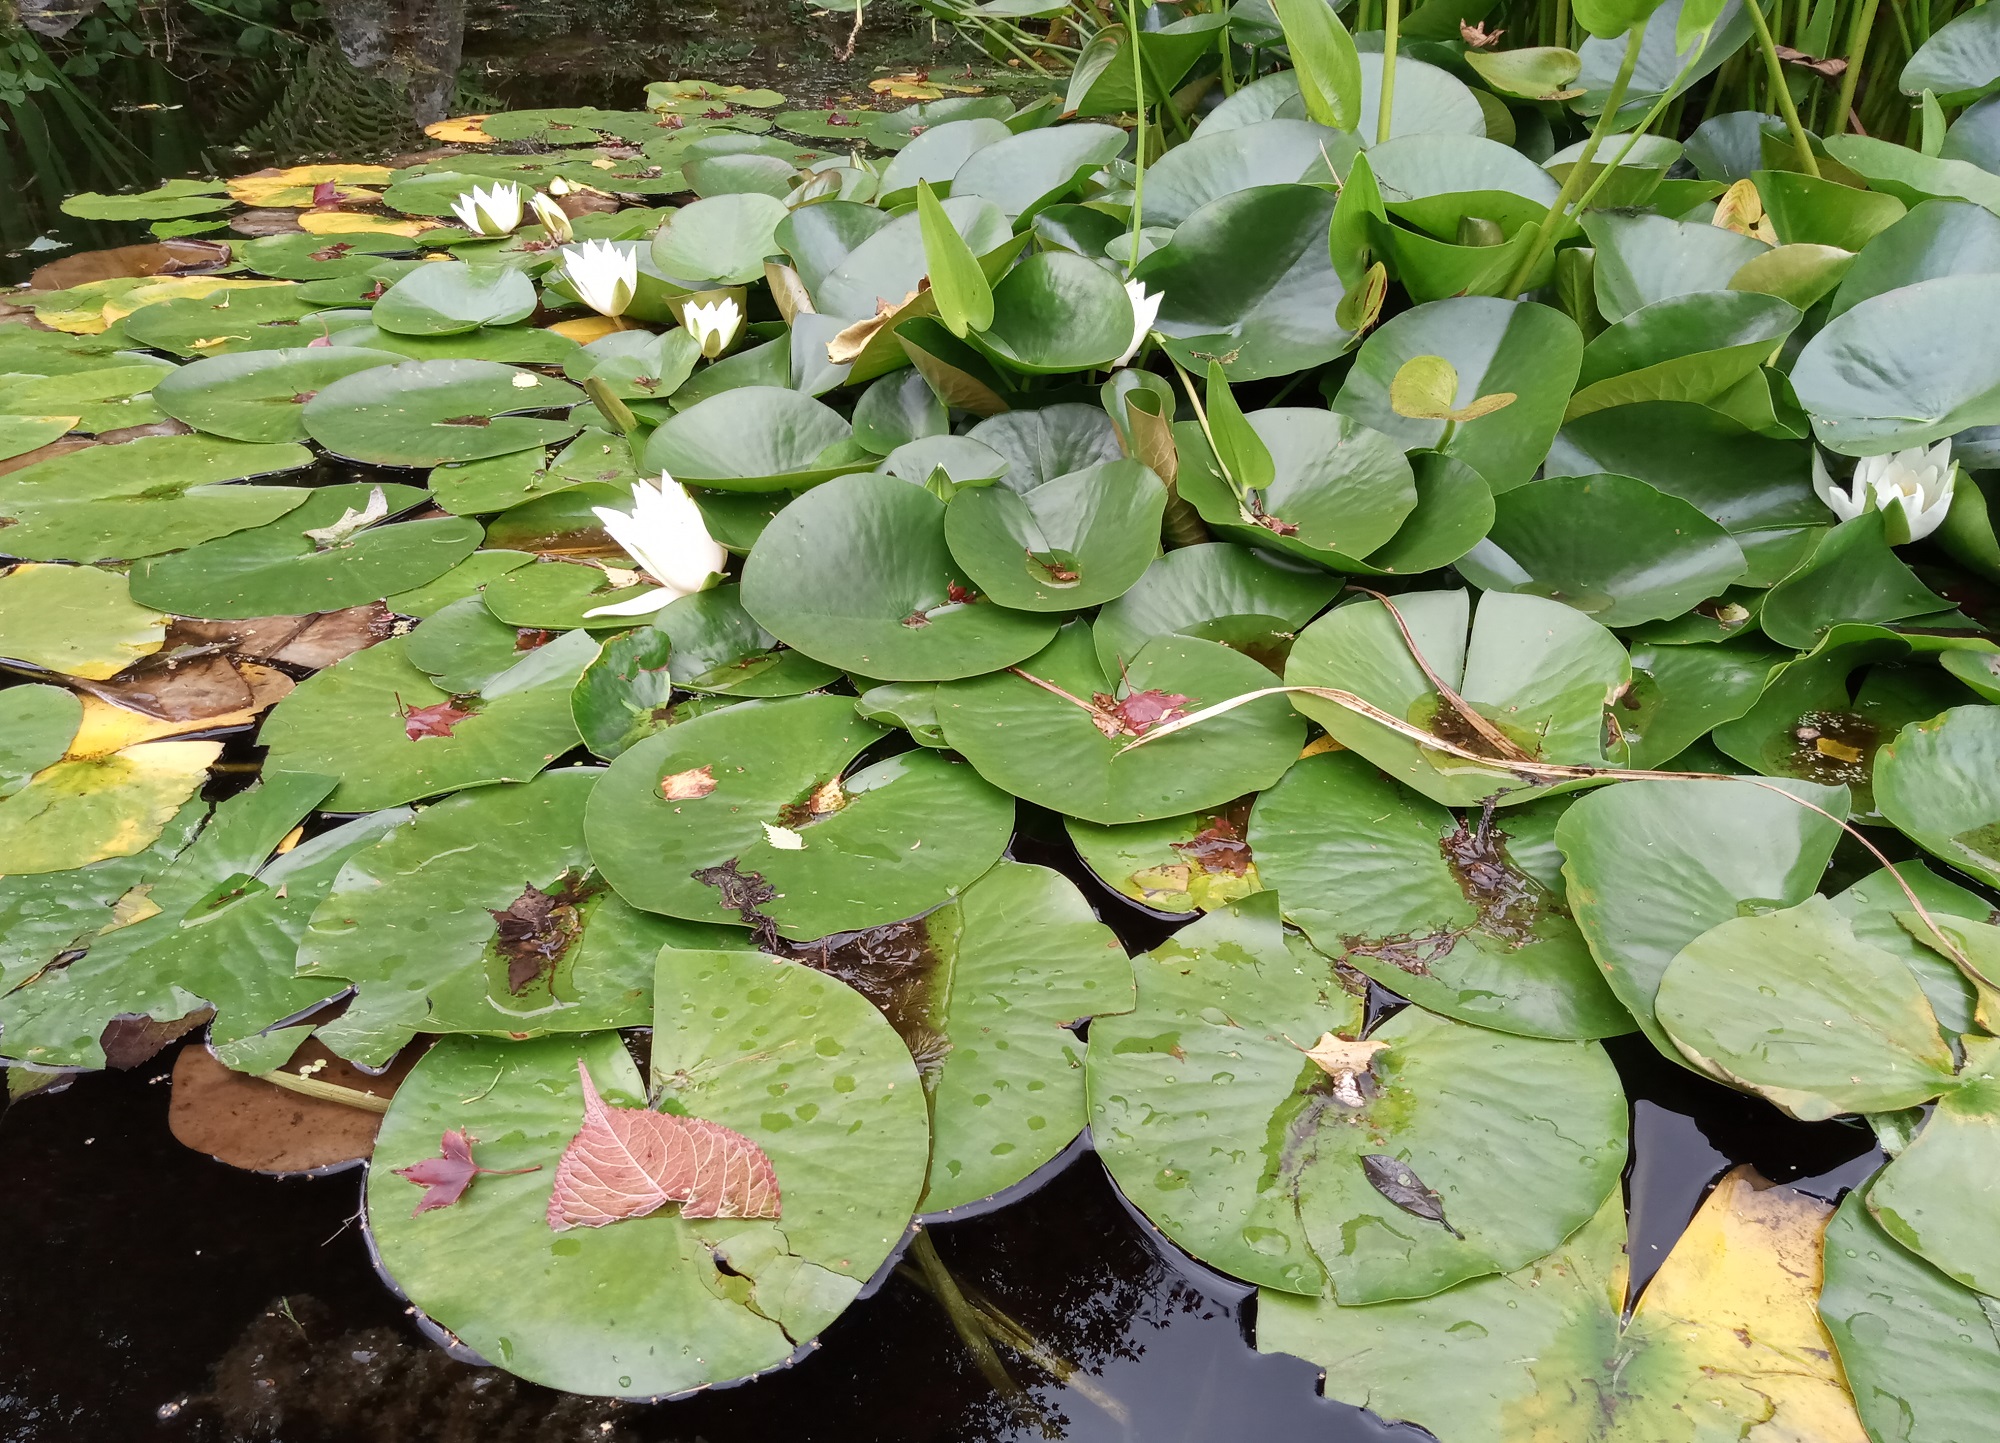 Lily pads in the summer